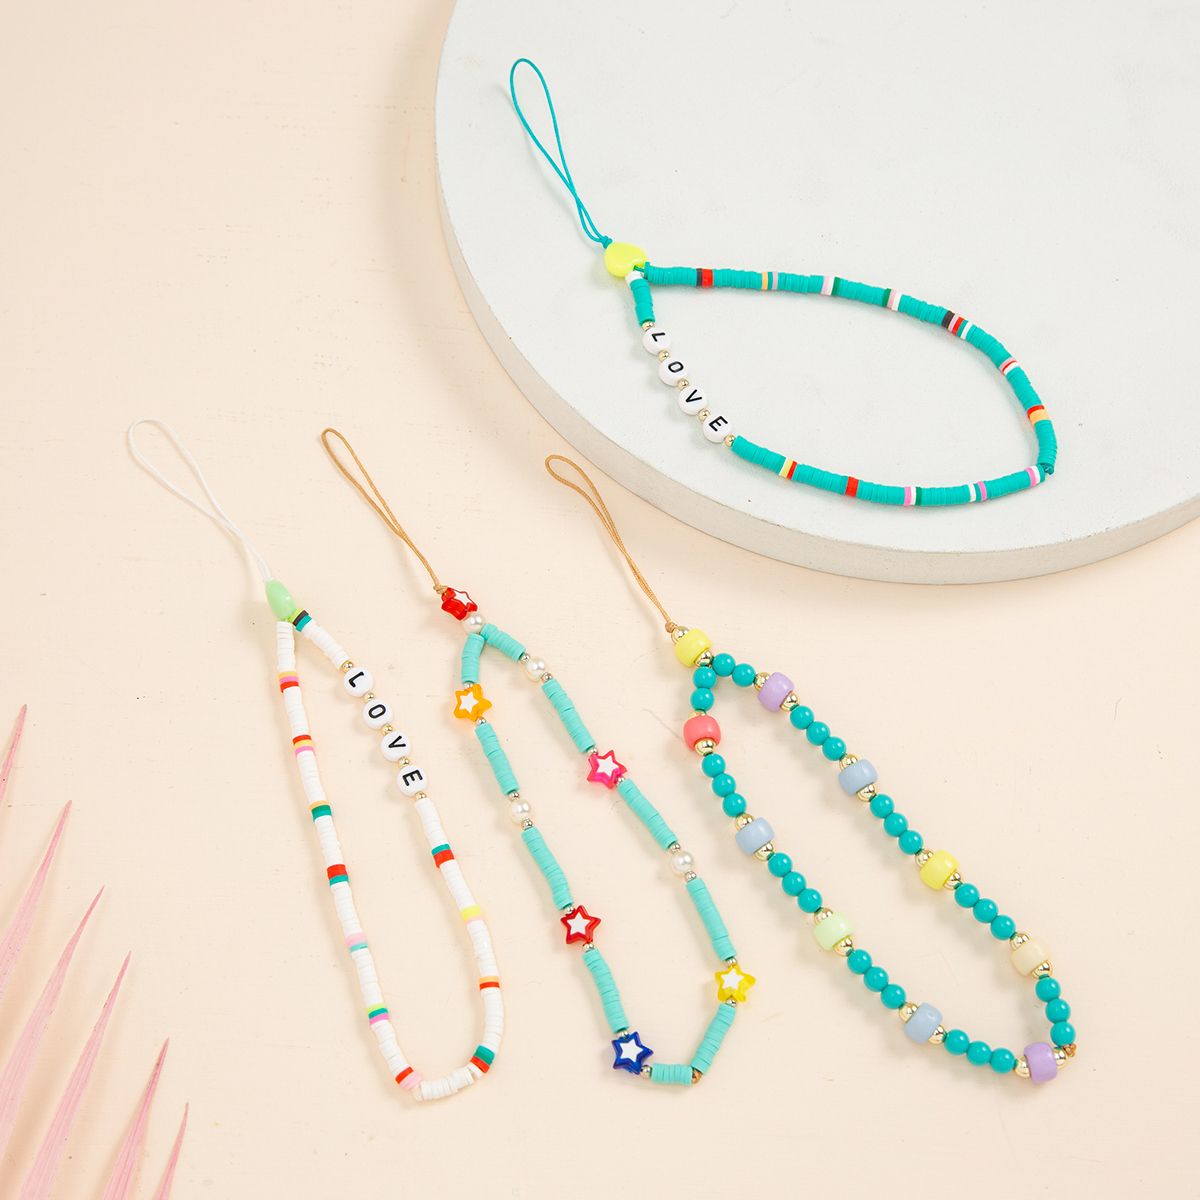 YNANA Fashion Acrylic Bead Colorful Anti-Lost Soft Pottery Rope Mobile Phone Strap Lanyard Cell Phone Case Hanging Cord Phone Chain